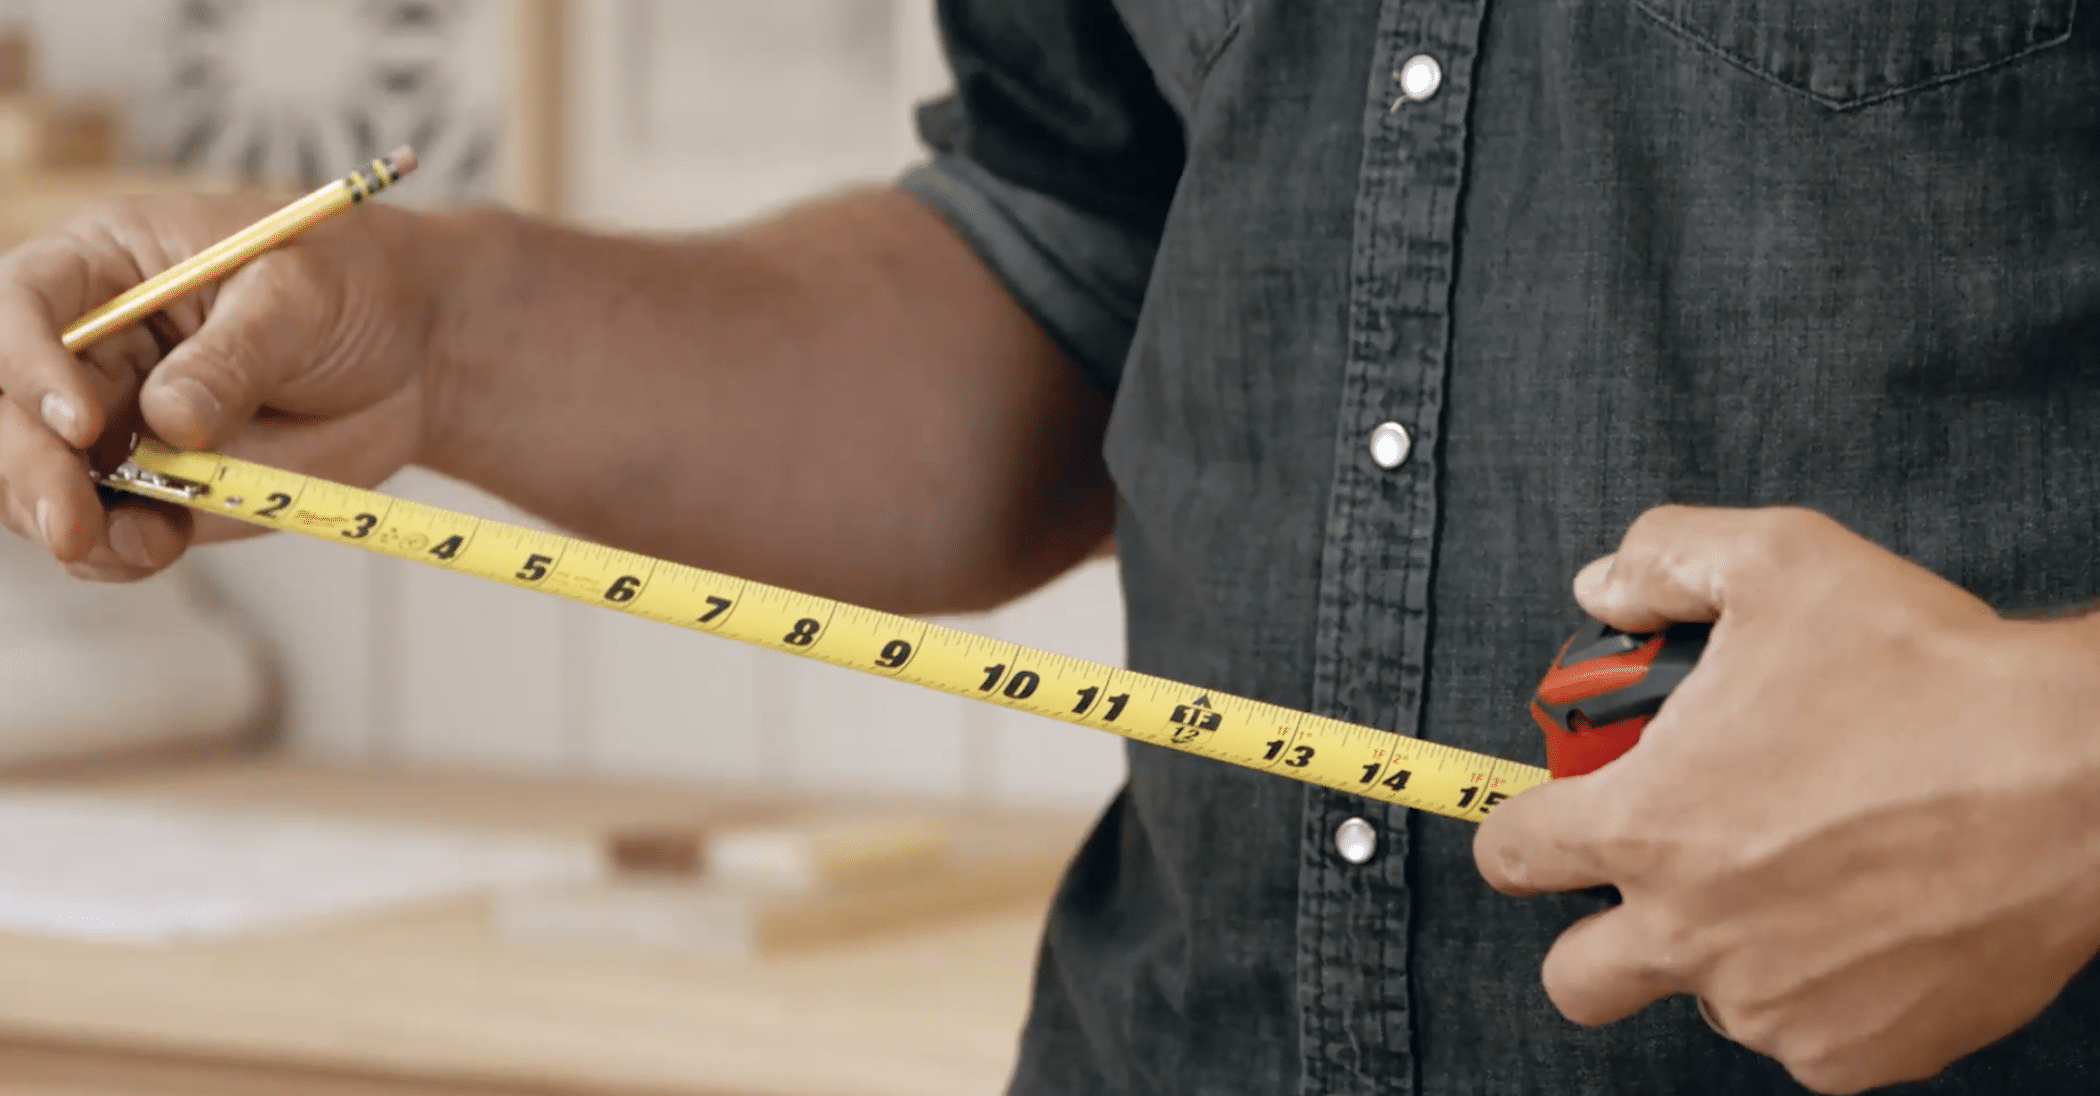 A person in a dark denim shirt uses a yellow measuring tape to measure a piece of wood for made-to-measure furniture. They hold a pencil in one hand, ready to mark measurements. The background is blurred, but it appears to be a workshop or woodworking space.